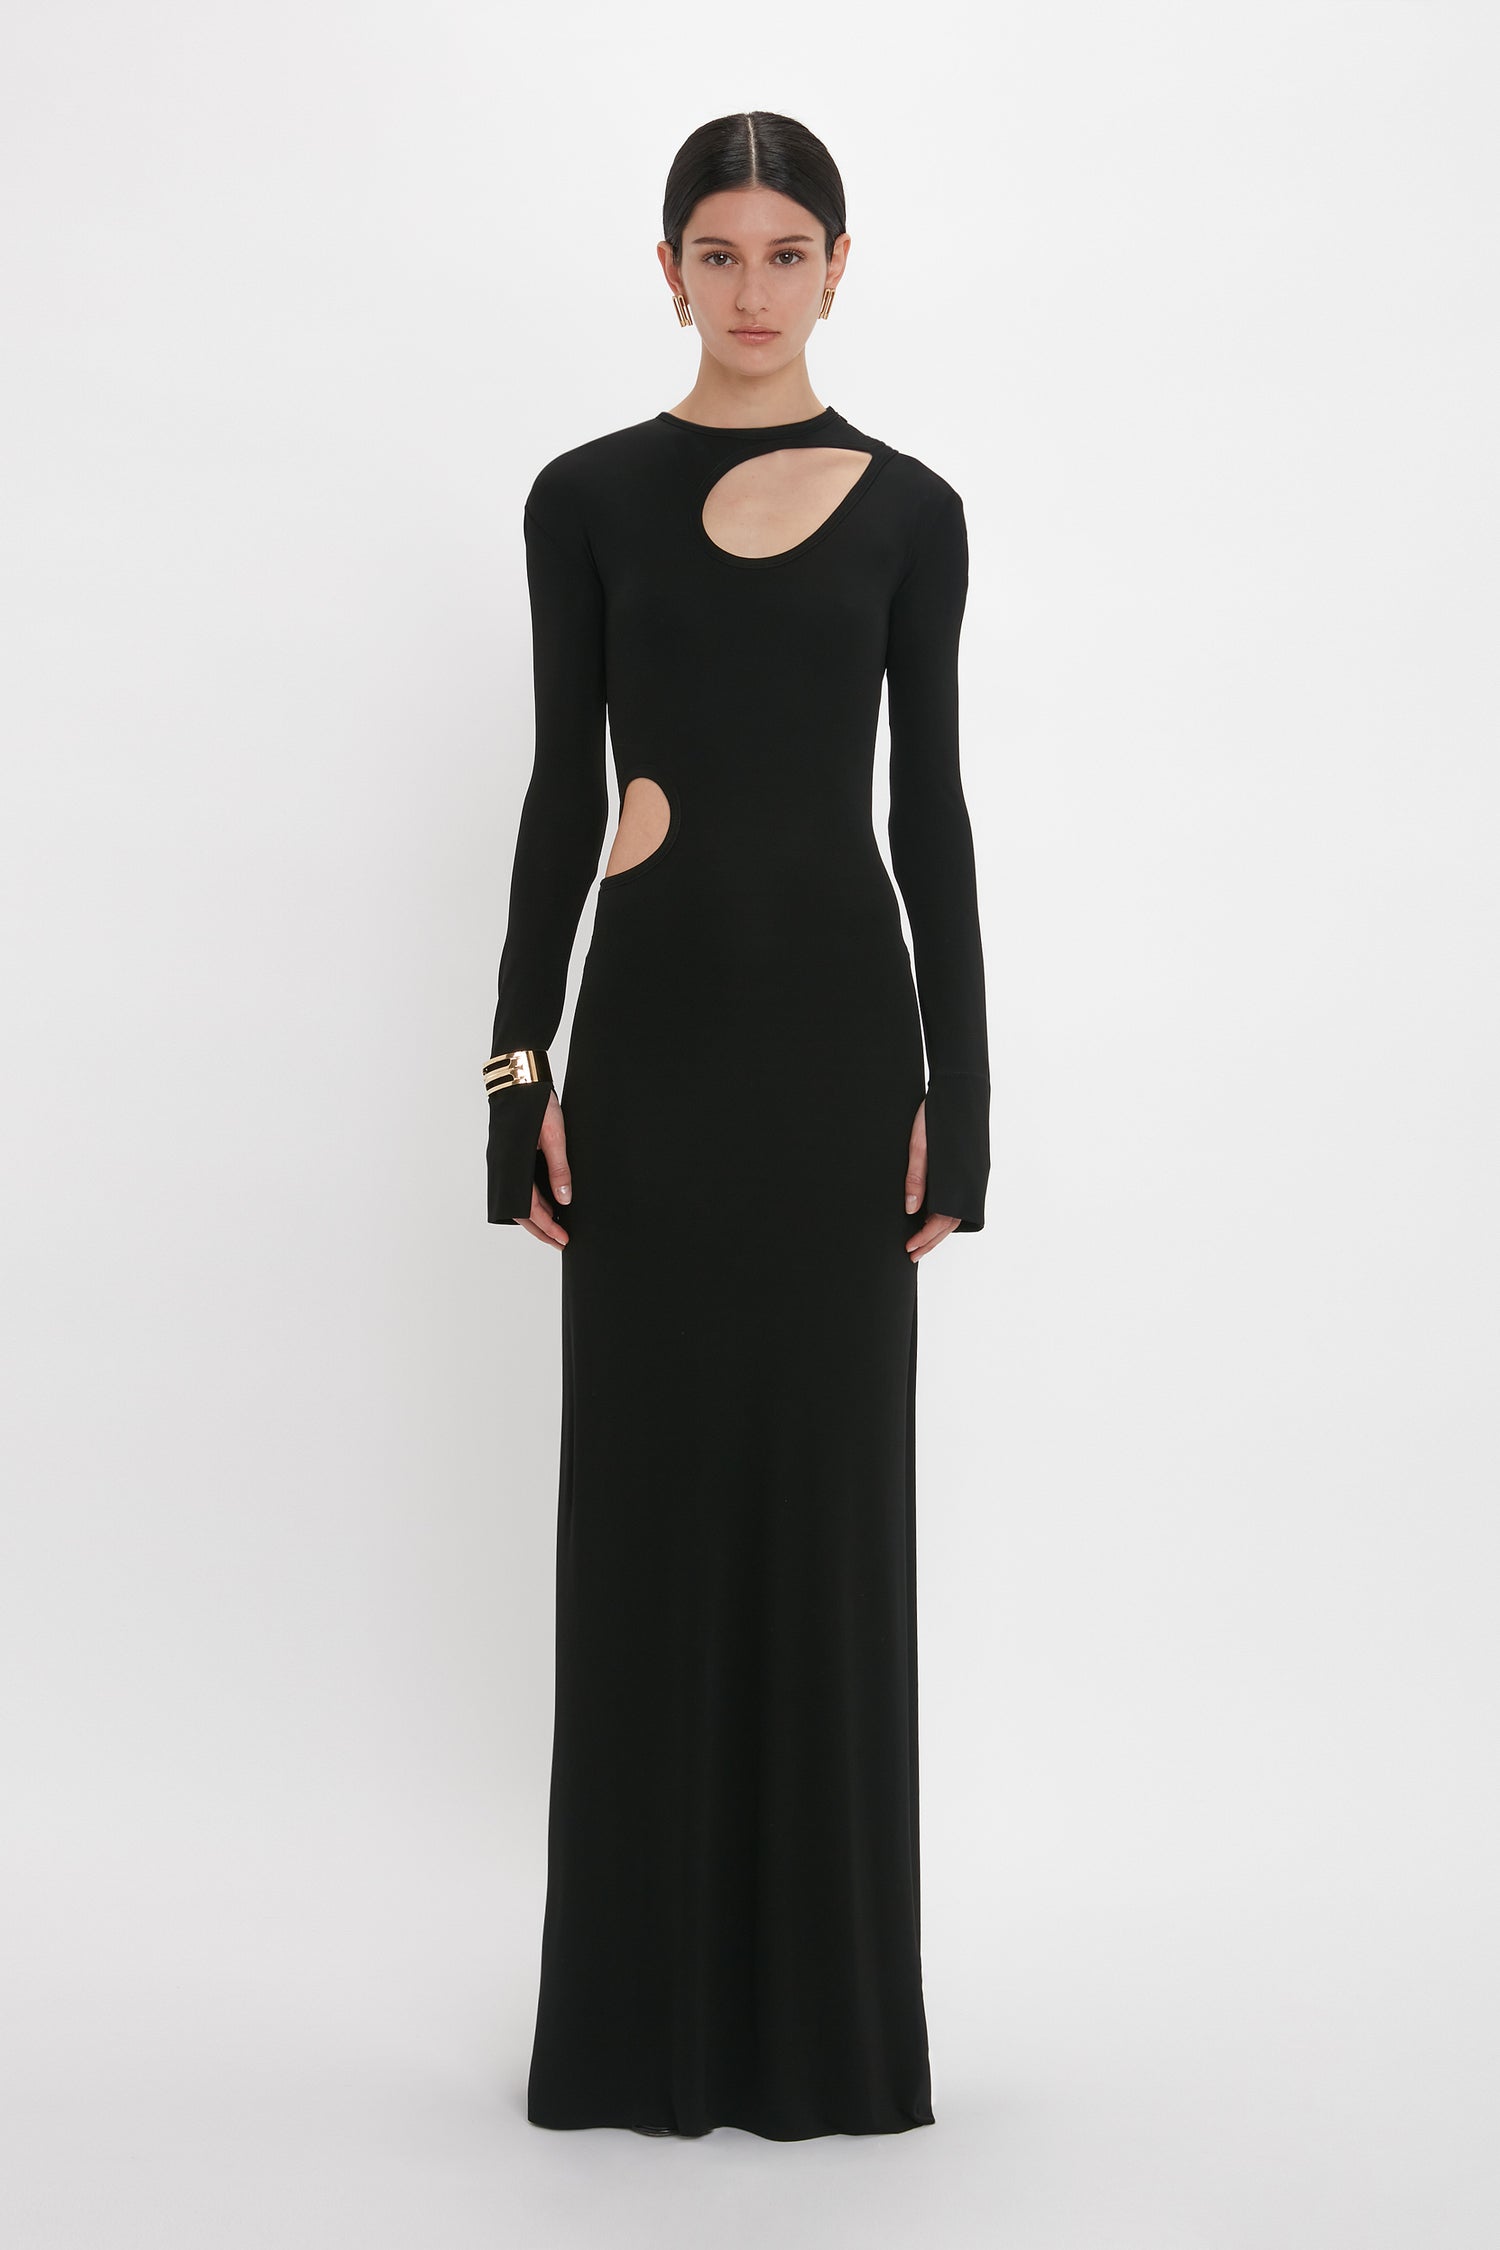 Person wearing a long, black, form-fitting evening gown with cut-out details on the chest and side, standing against a plain white background. The Cut-Out Jersey Floor-Length Dress In Black resembles a chic design from Victoria Beckham's collection.